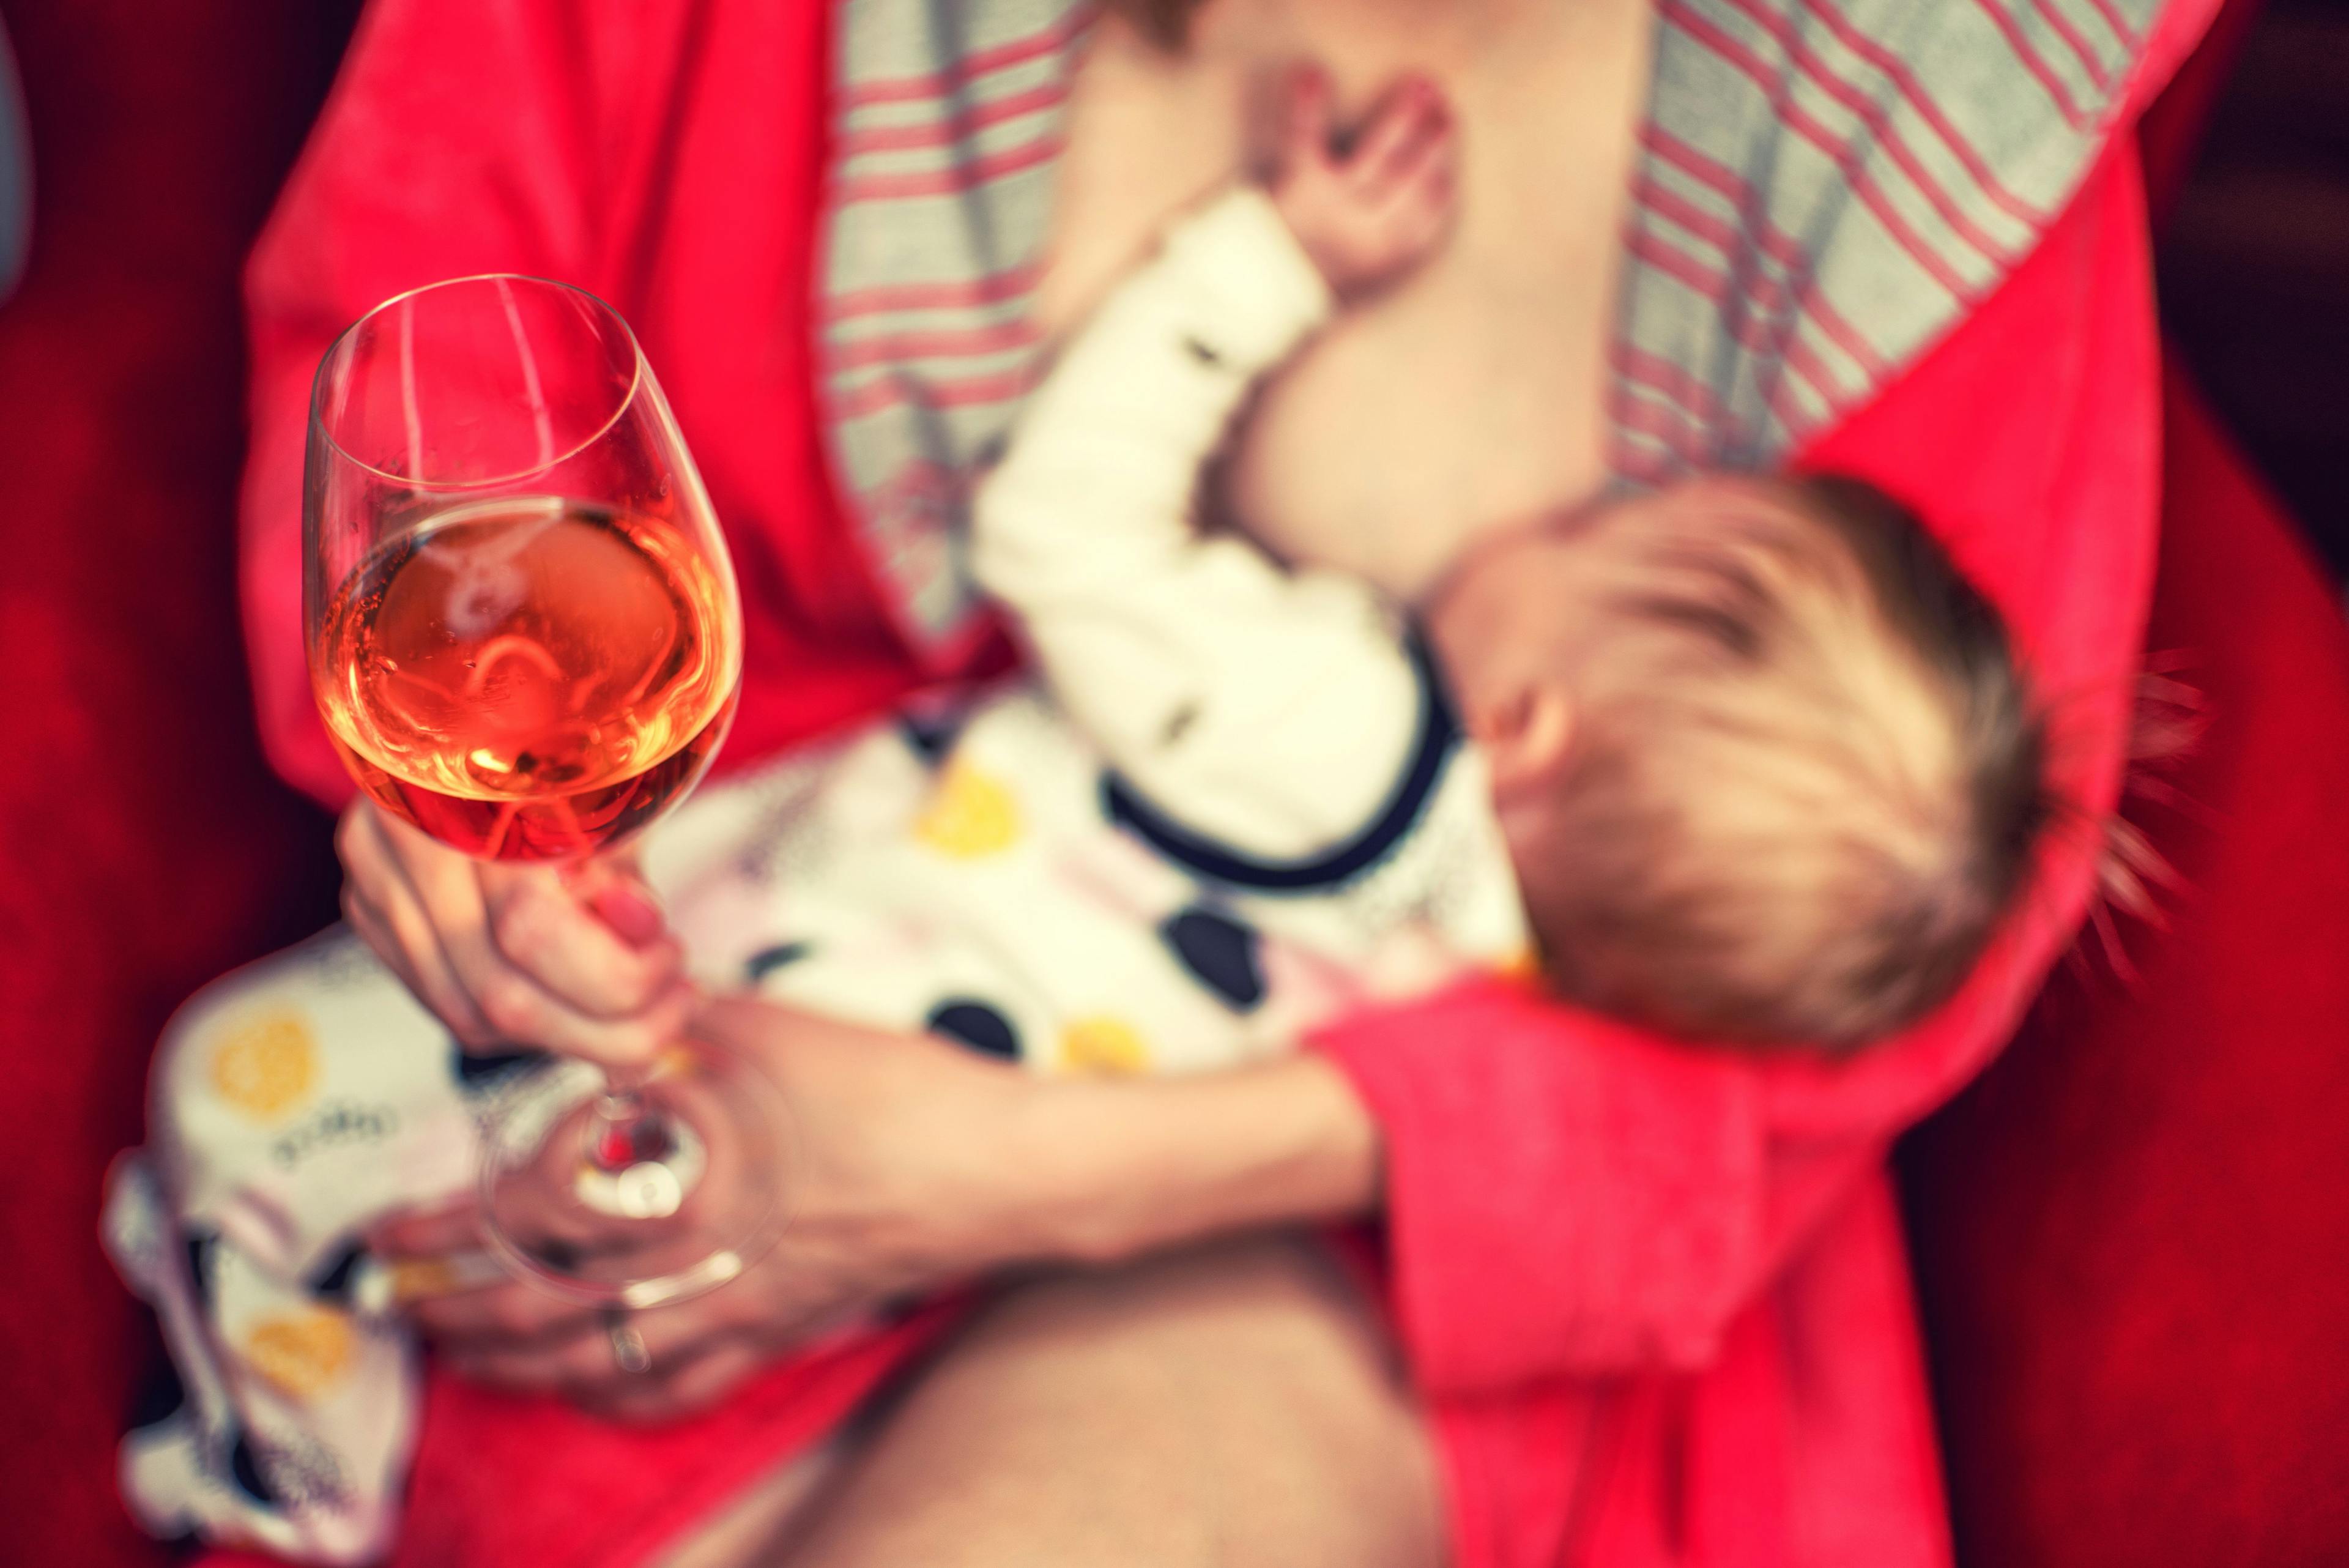 Woman drinking alcohol wine while breastfeeding child